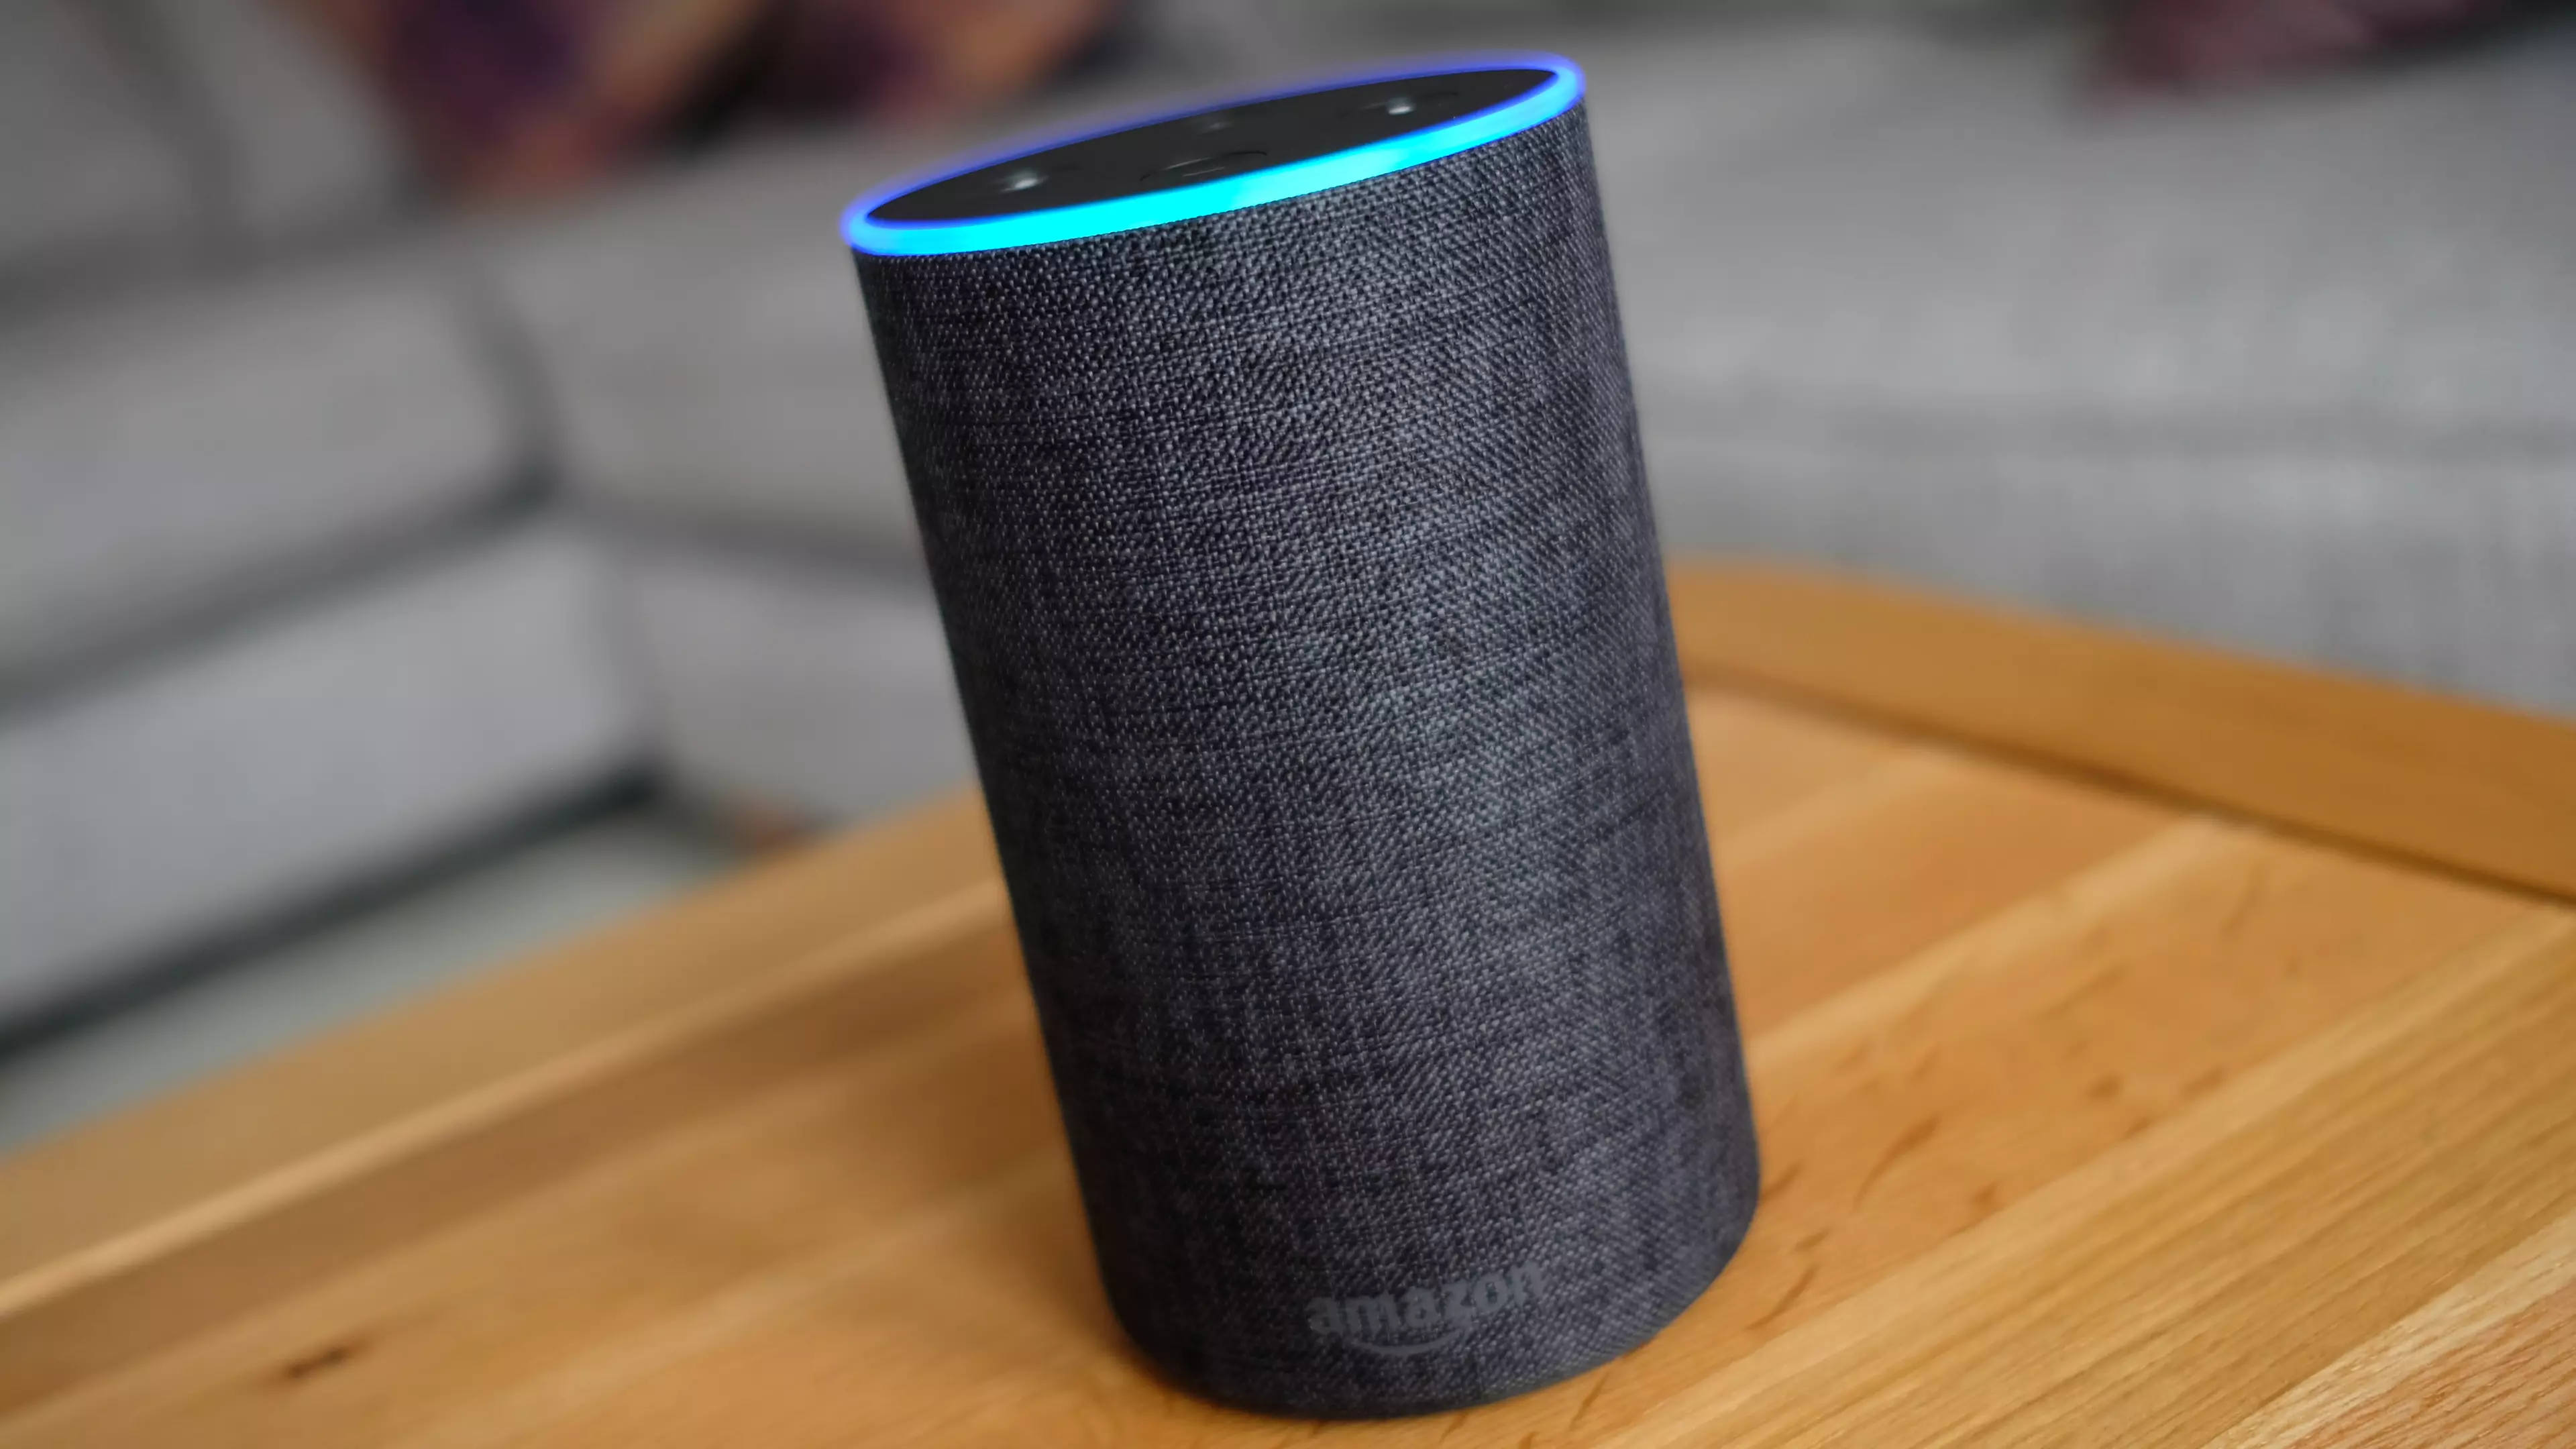 Mum Shares Incredible Alexa Parenting Hack To Potty Train Her Son